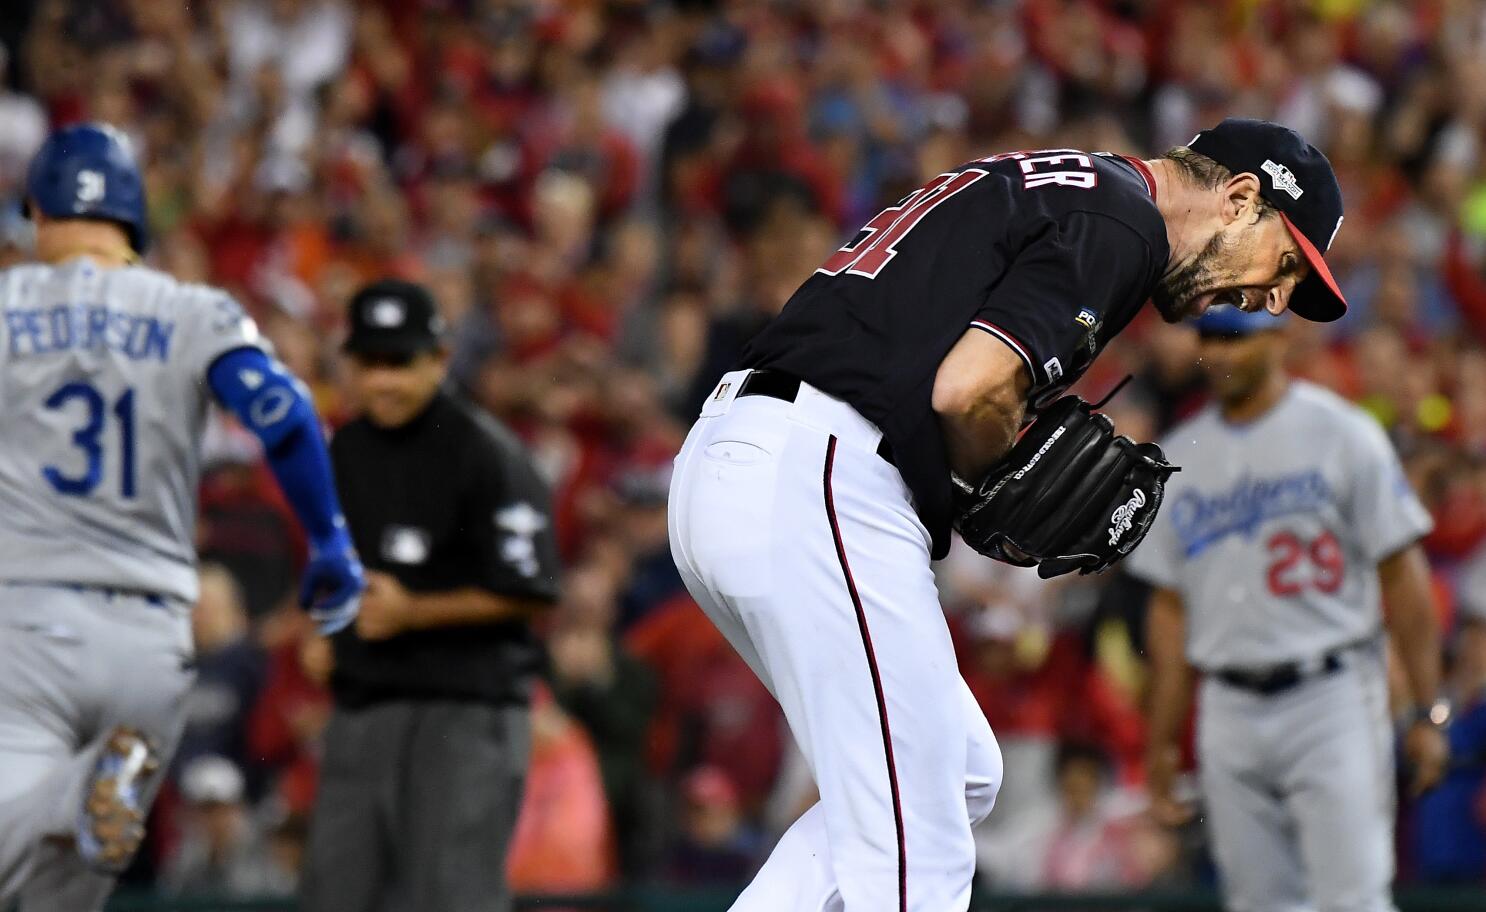 Washington Nationals: Ryan Zimmerman stayed in the fight